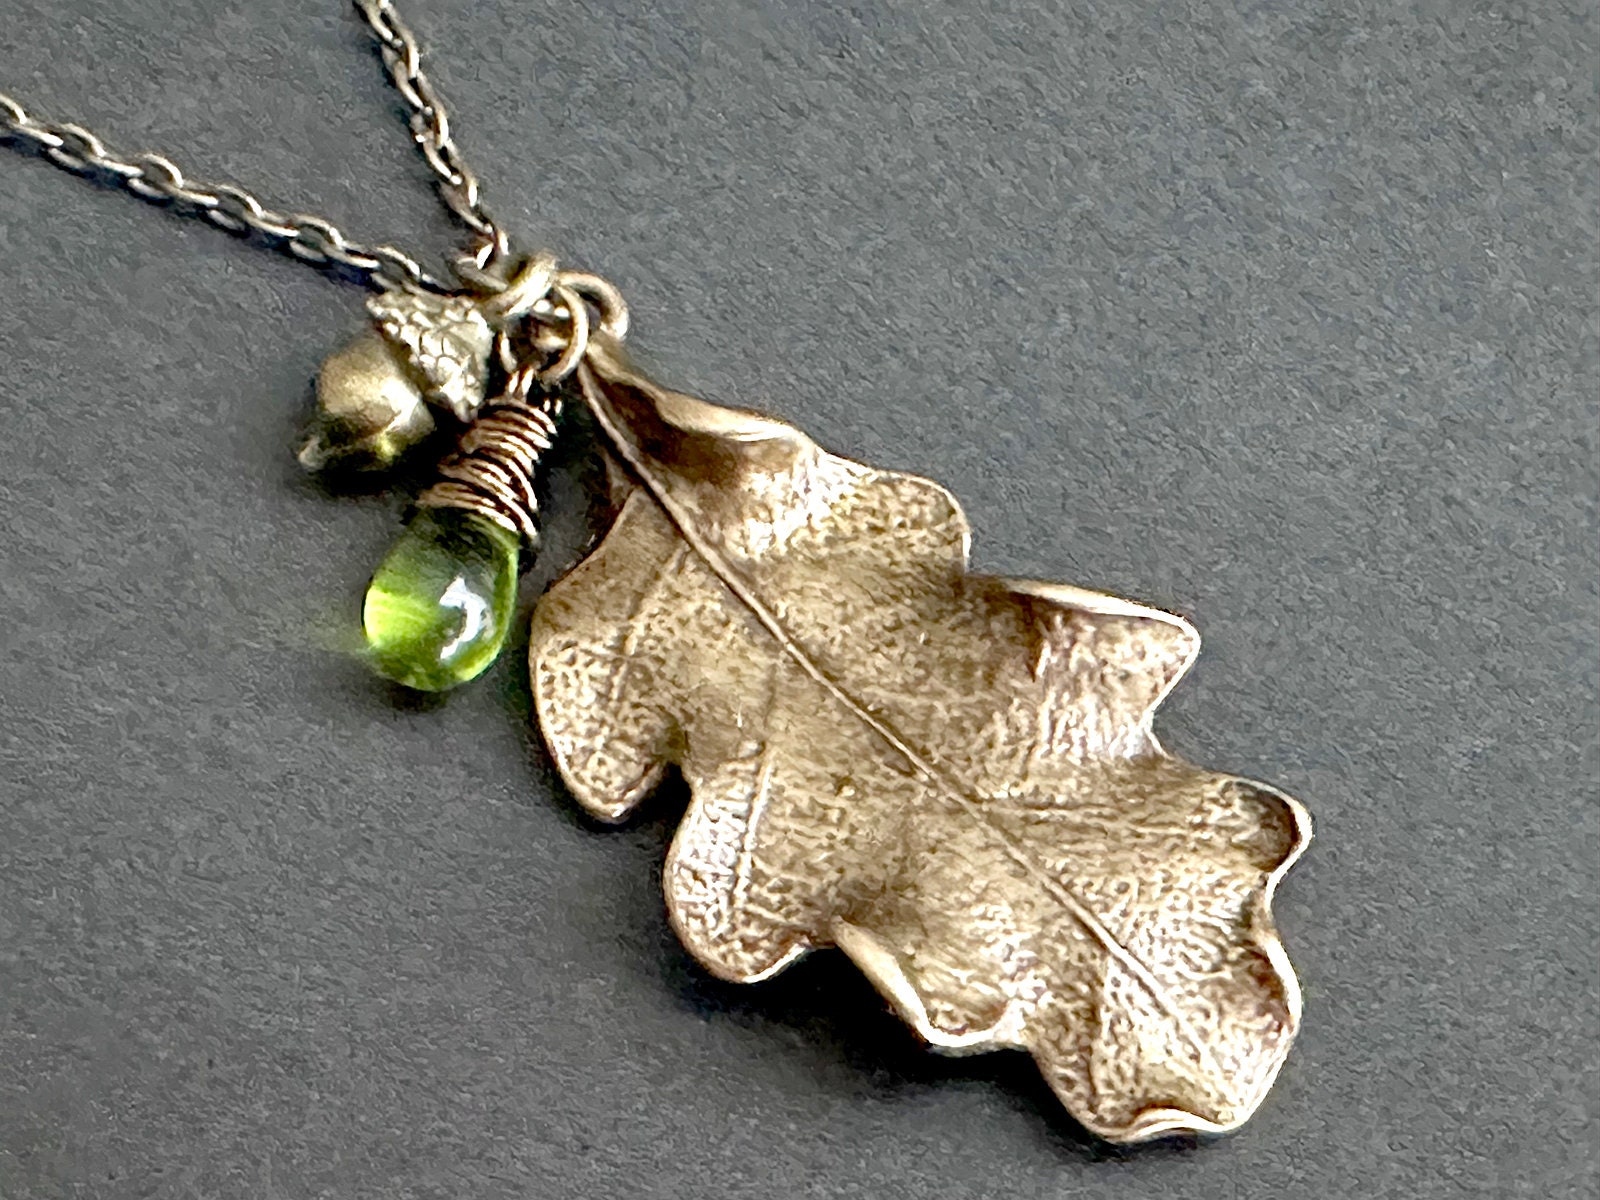 Small Fallen Copper Cottonwood Leaf Necklace | Real Leaf Pendant | Electroformed Nature Jewelry 18 Chain